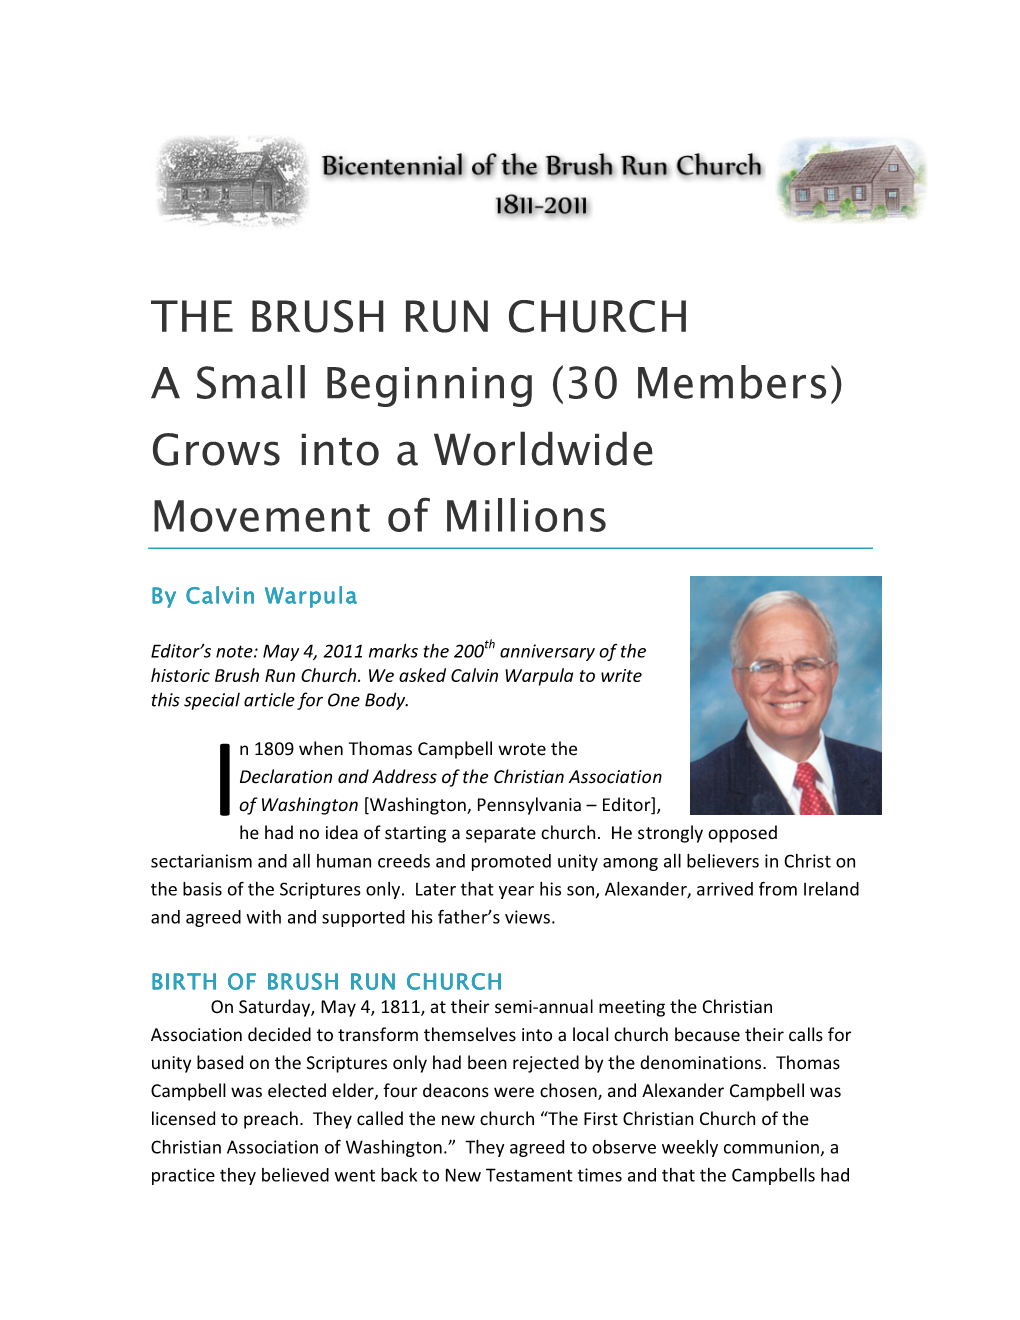 THE BRUSH RUN CHURCH a Small Beginning (30 Members) Grows Into a Worldwide Movement of Millions